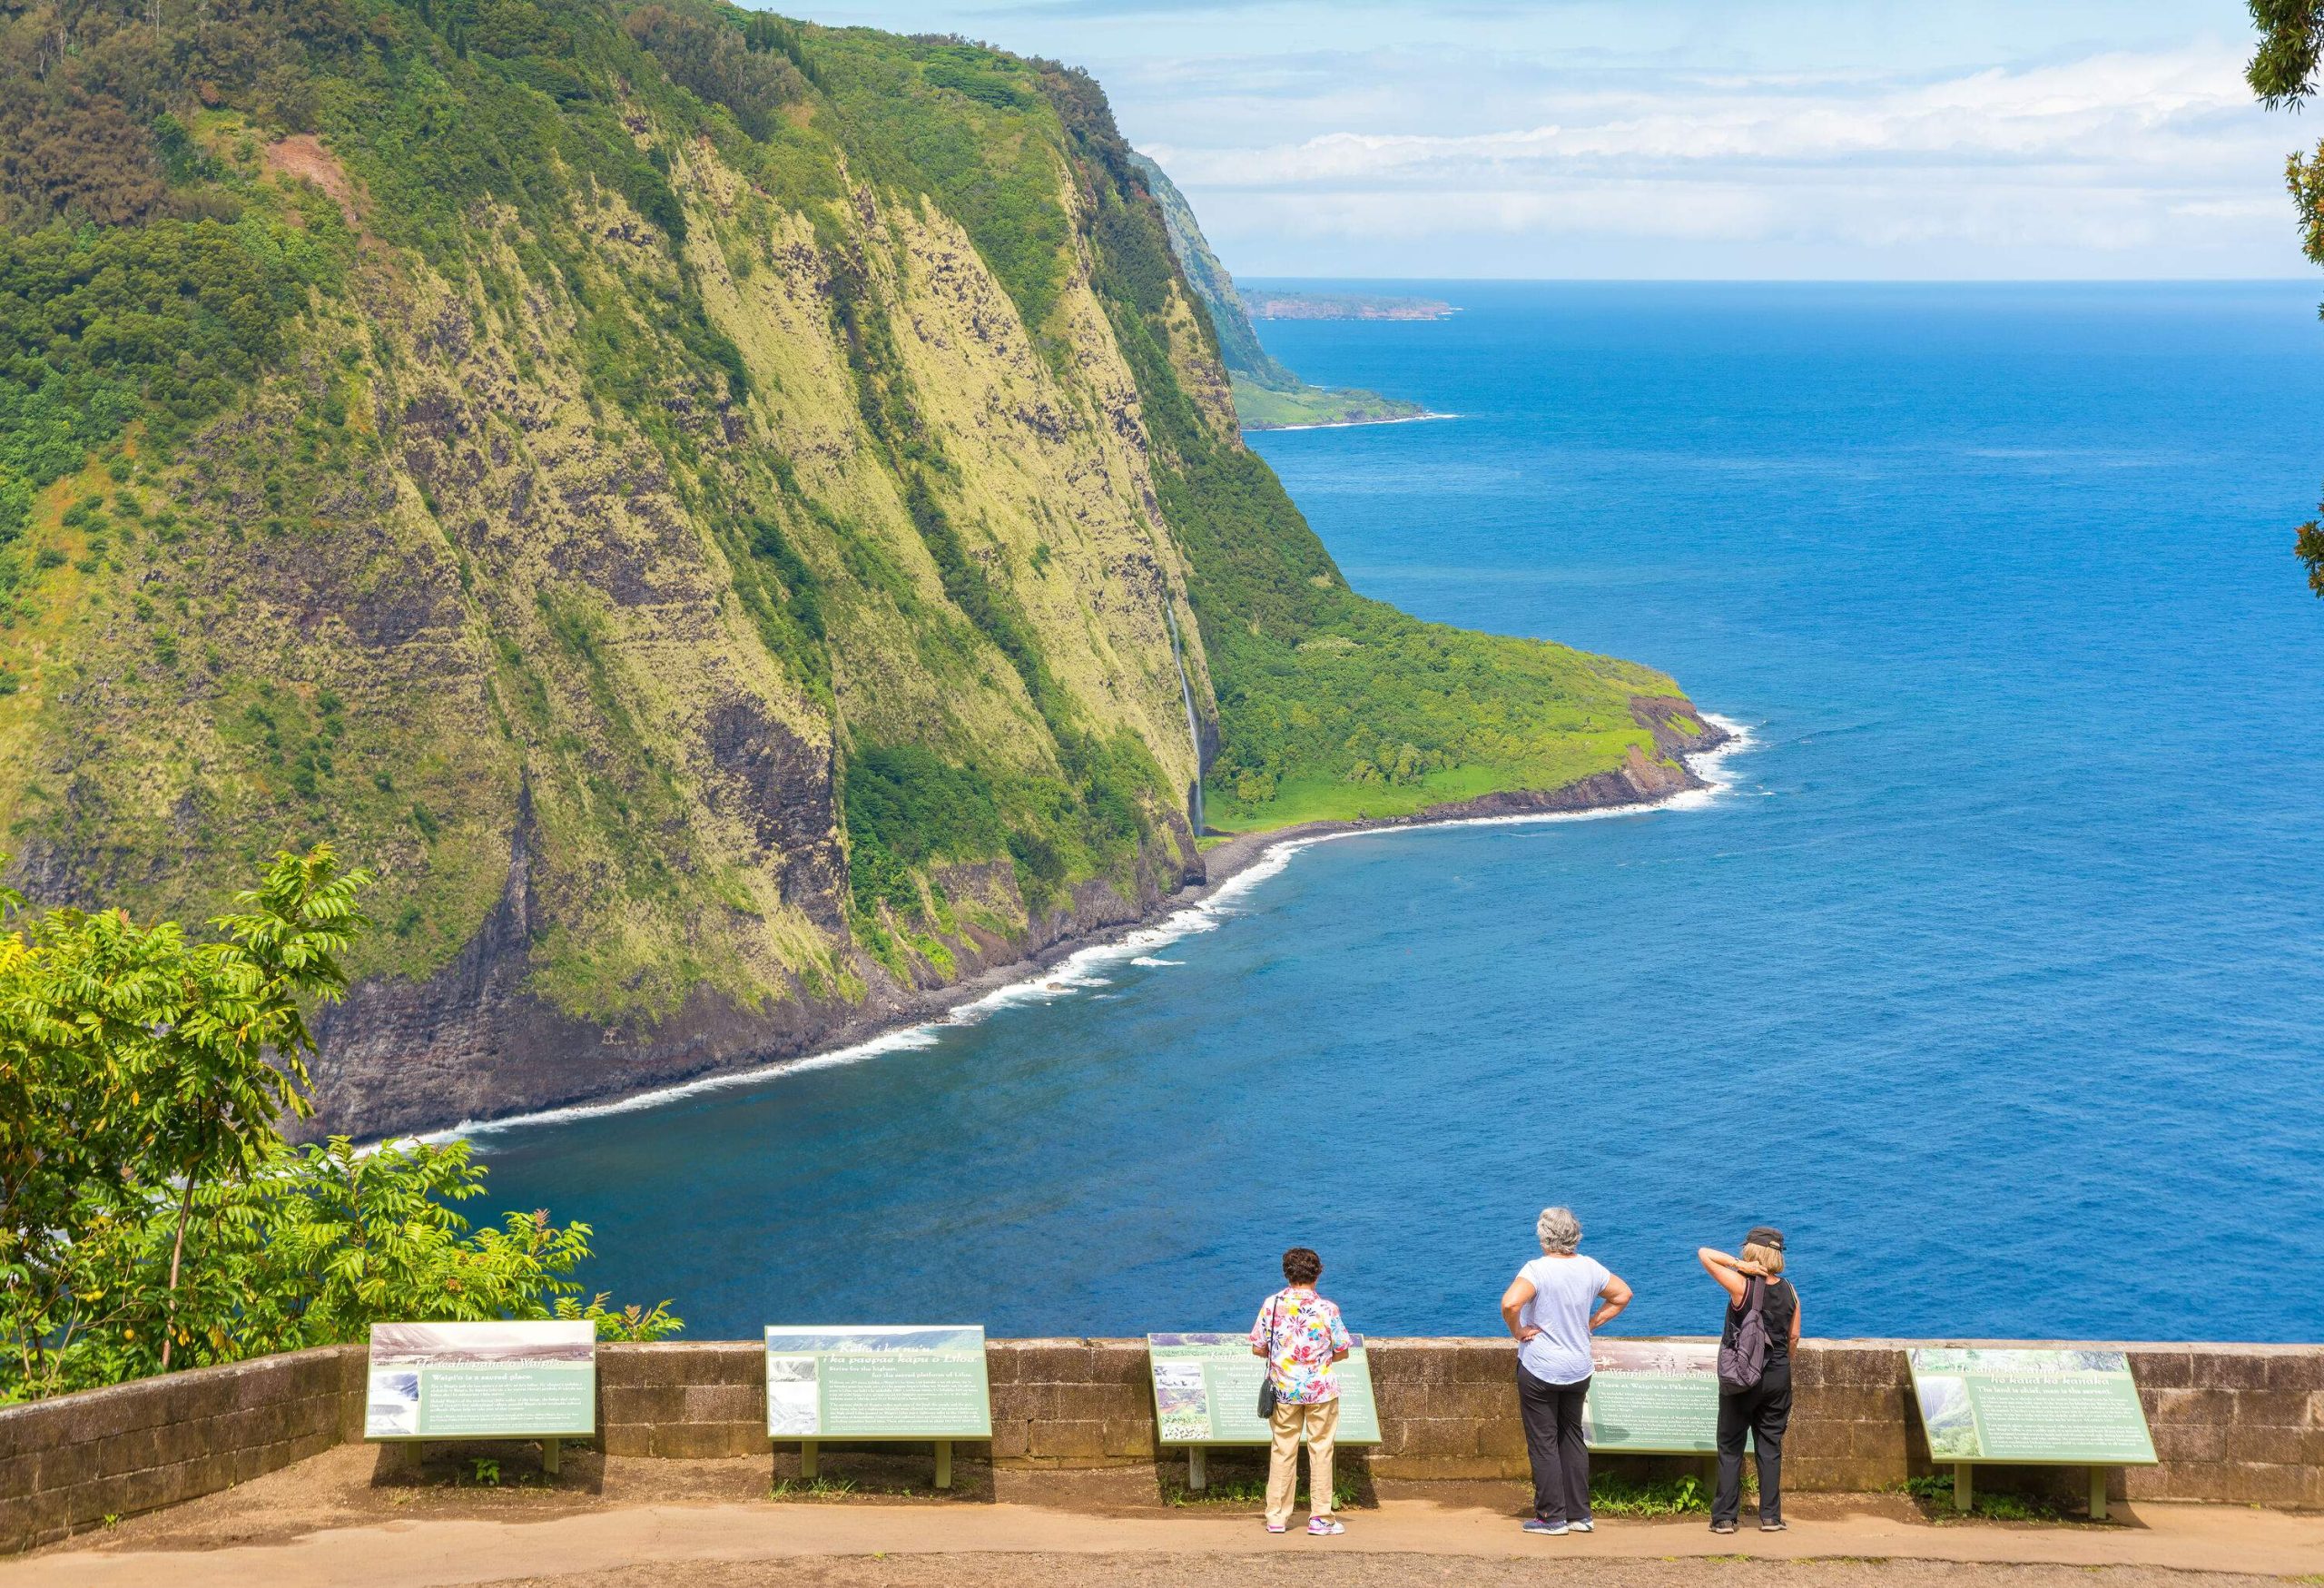 Three individuals on a viewing deck overlooking the forested cliff surrounded by the tranquil blue sea.